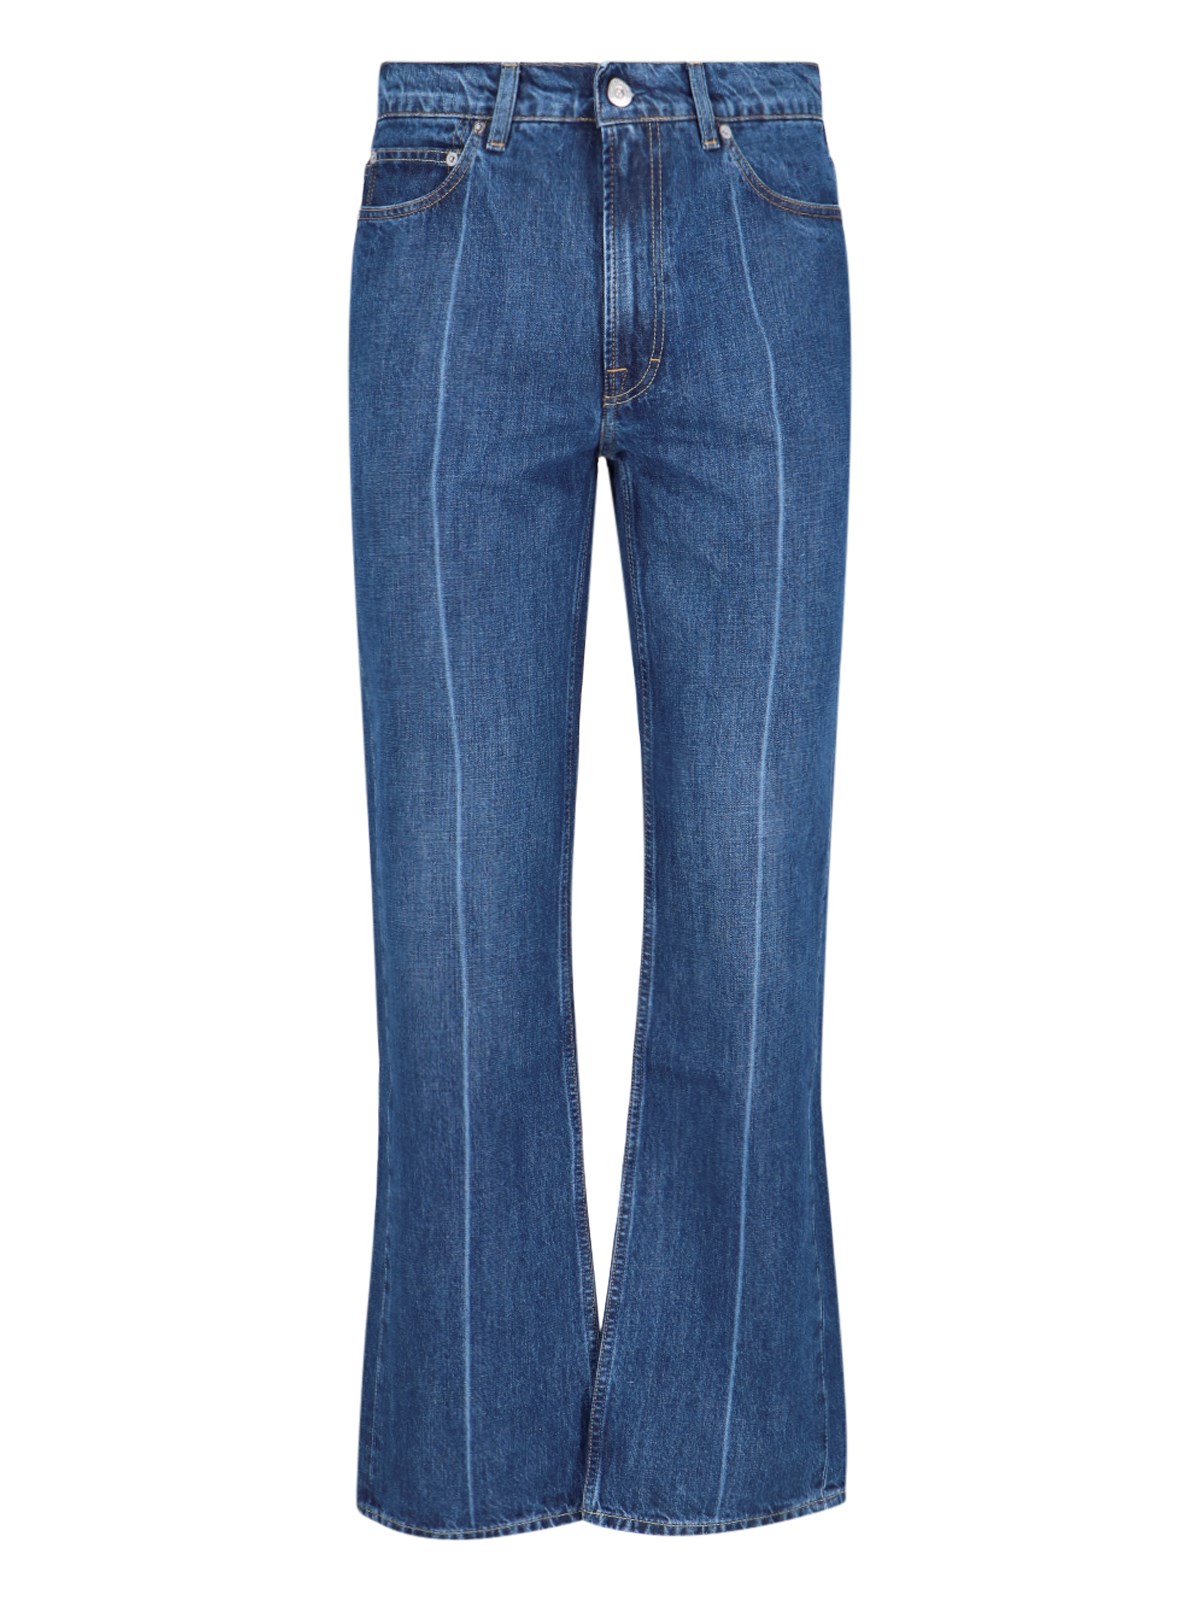 Shop Our Legacy "70s Cut" Jeans In Blue